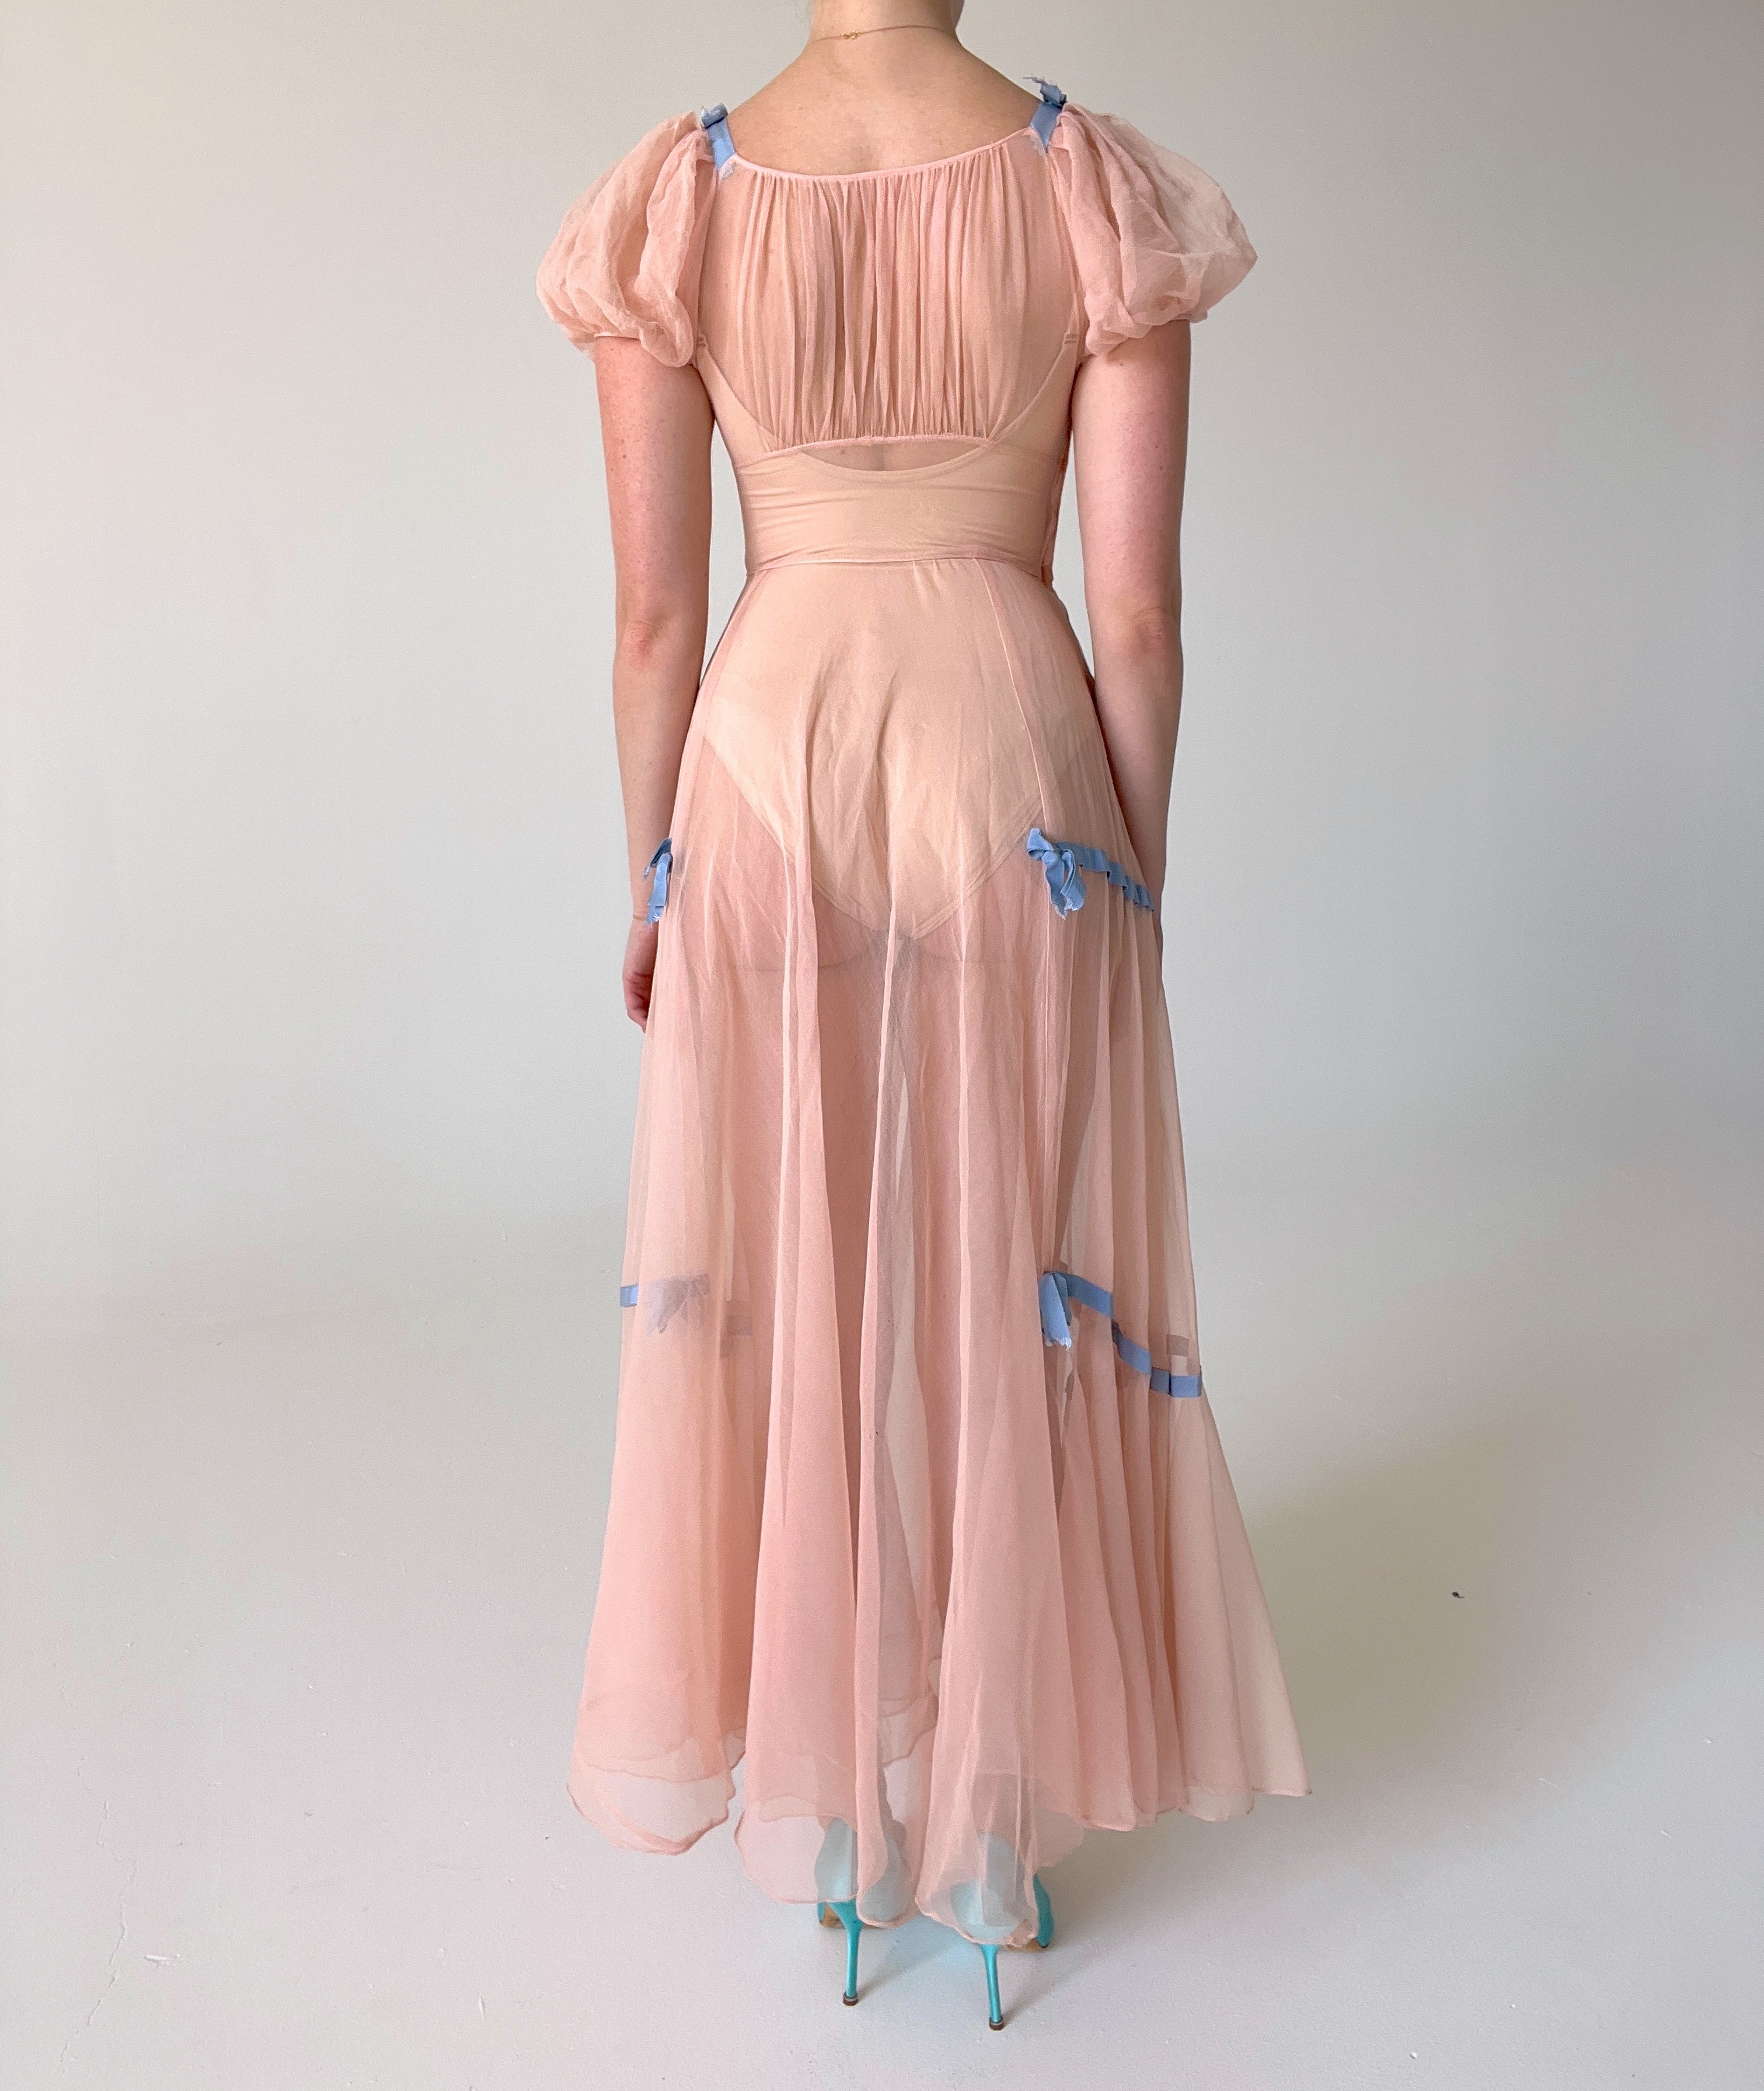 1930's Pink Puff Sleeve Chiffon Dress with Blue Bow Ribbons